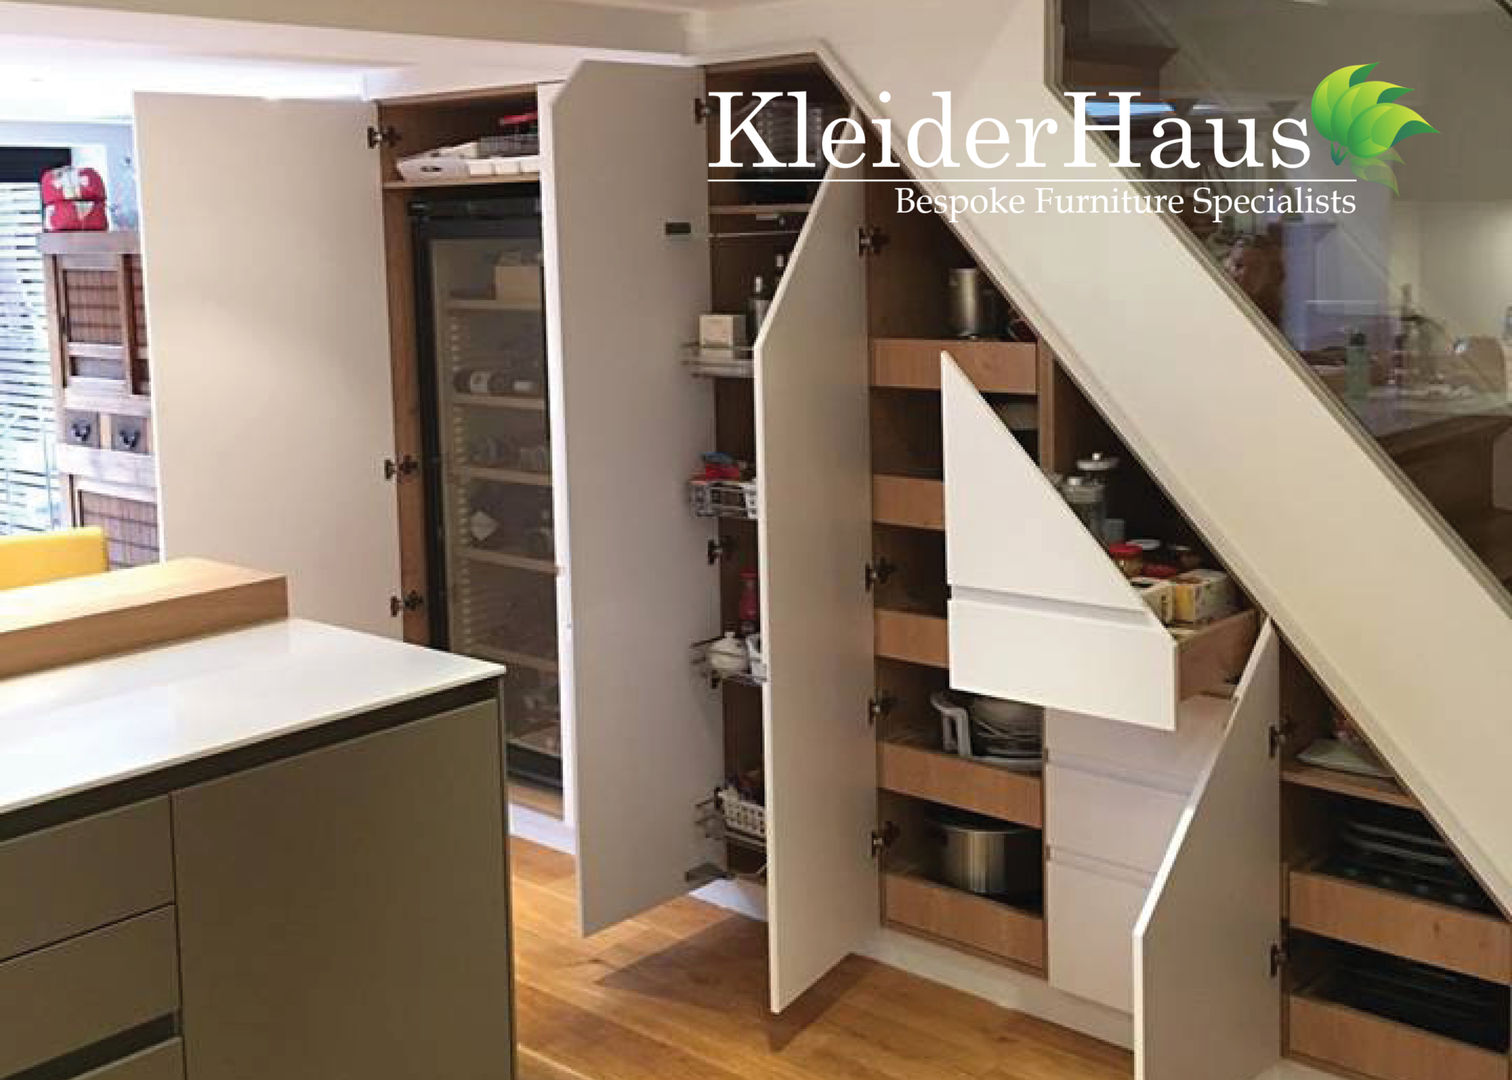 Kitchen Understairs unit - Finally project Completed by Kleiderhaus Kleiderhaus ltd Cuisine moderne understairs,kitchen understairs,kitchen,fitted kitchen,utility,made to measure,awkward space,bespoke kitchen,joinery,kitchen remodeling,custom made,under-stairs